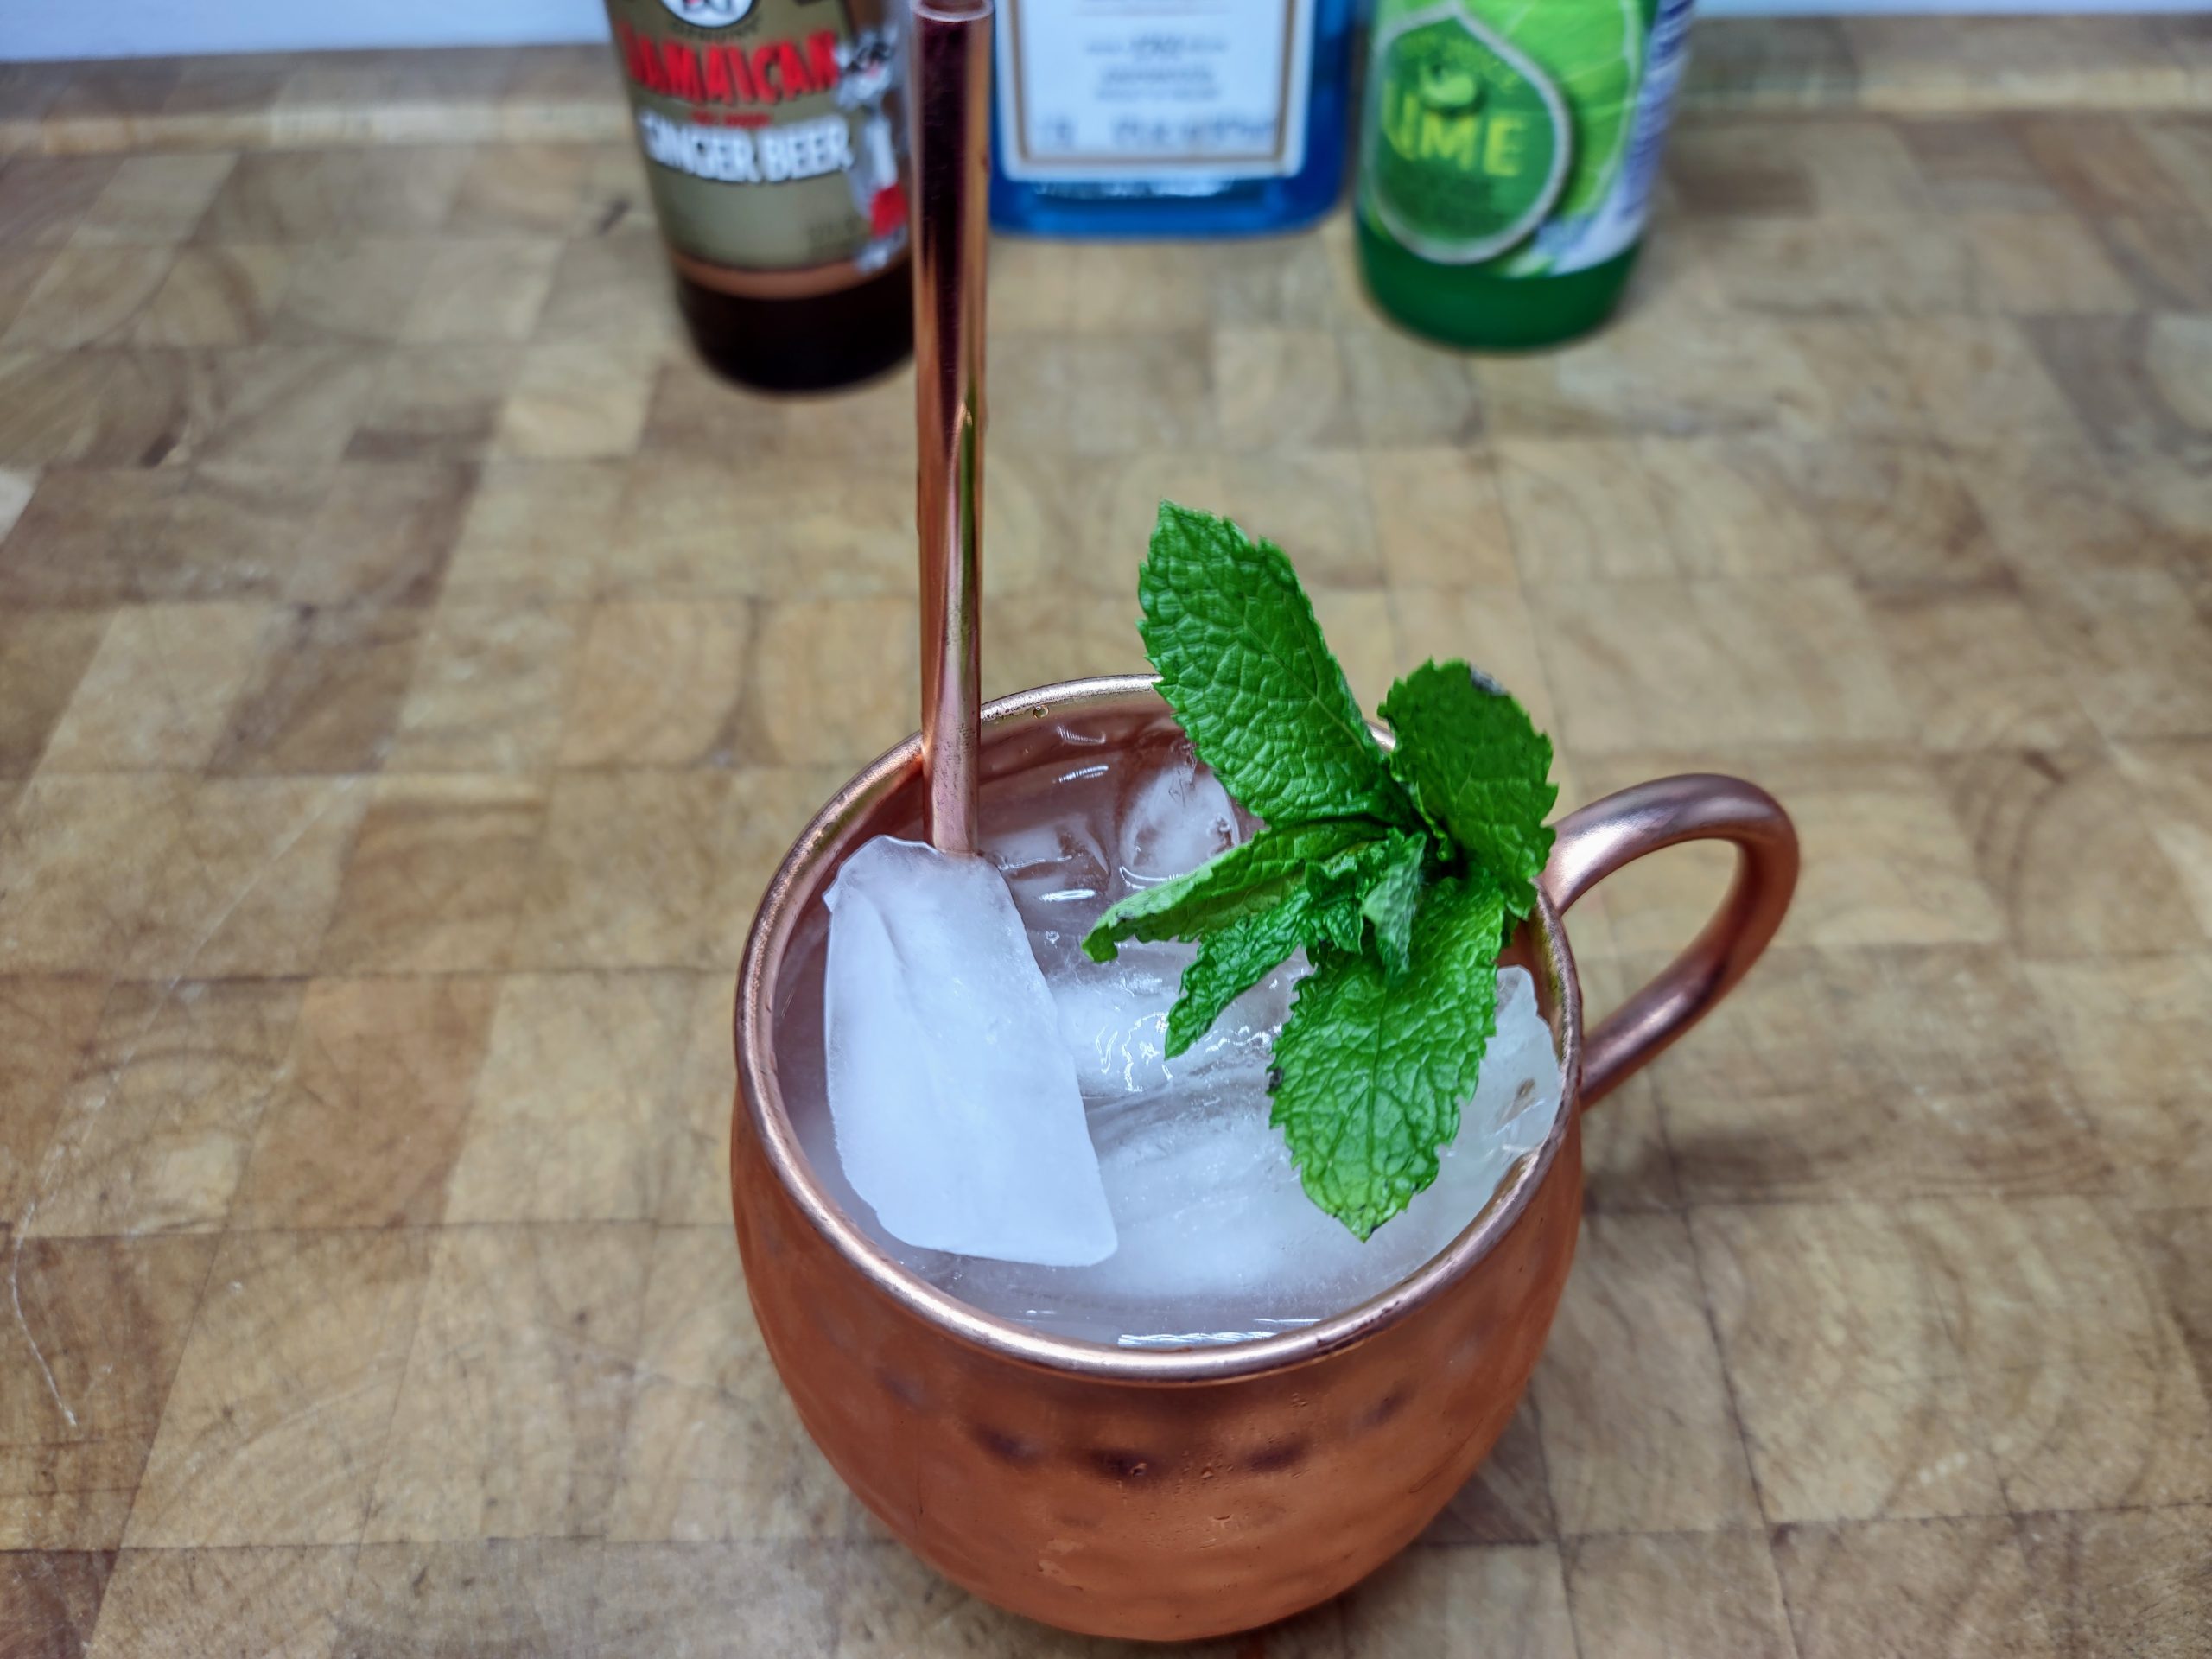 gin-gin mule in a copper mug with mint and a copper straw.  Ingredient bottles in the background.